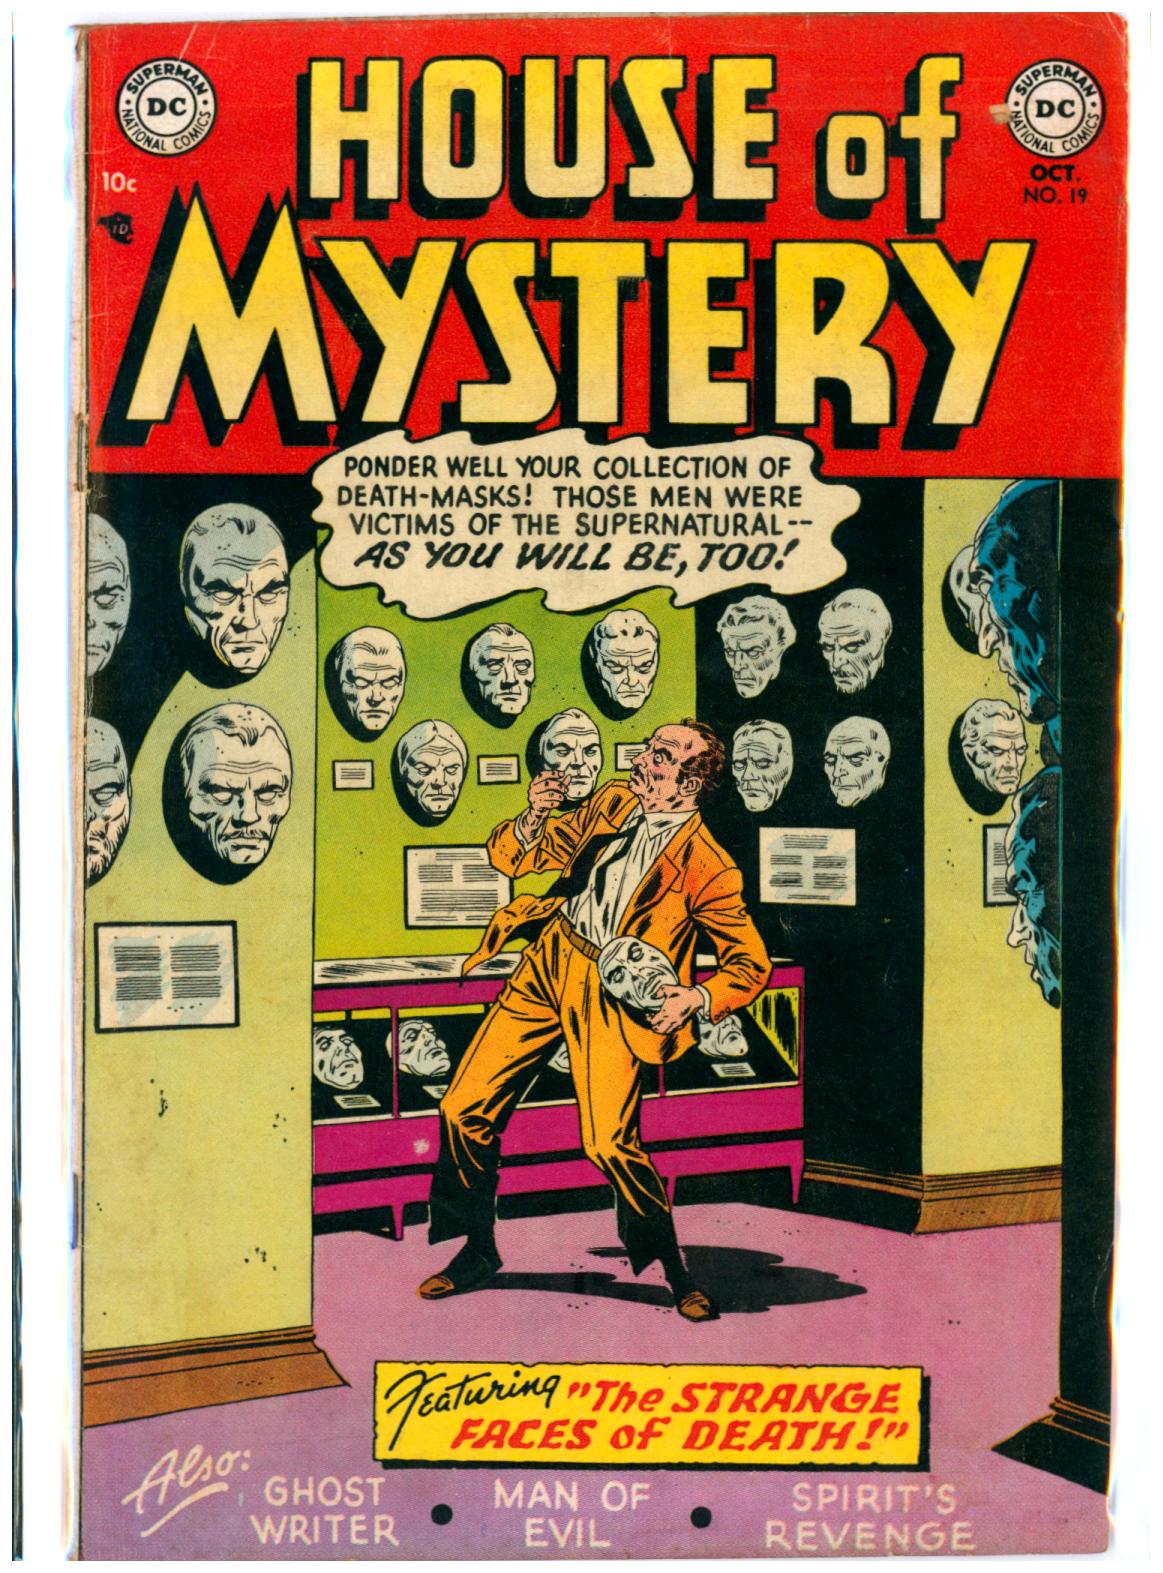 House of Mystery #19